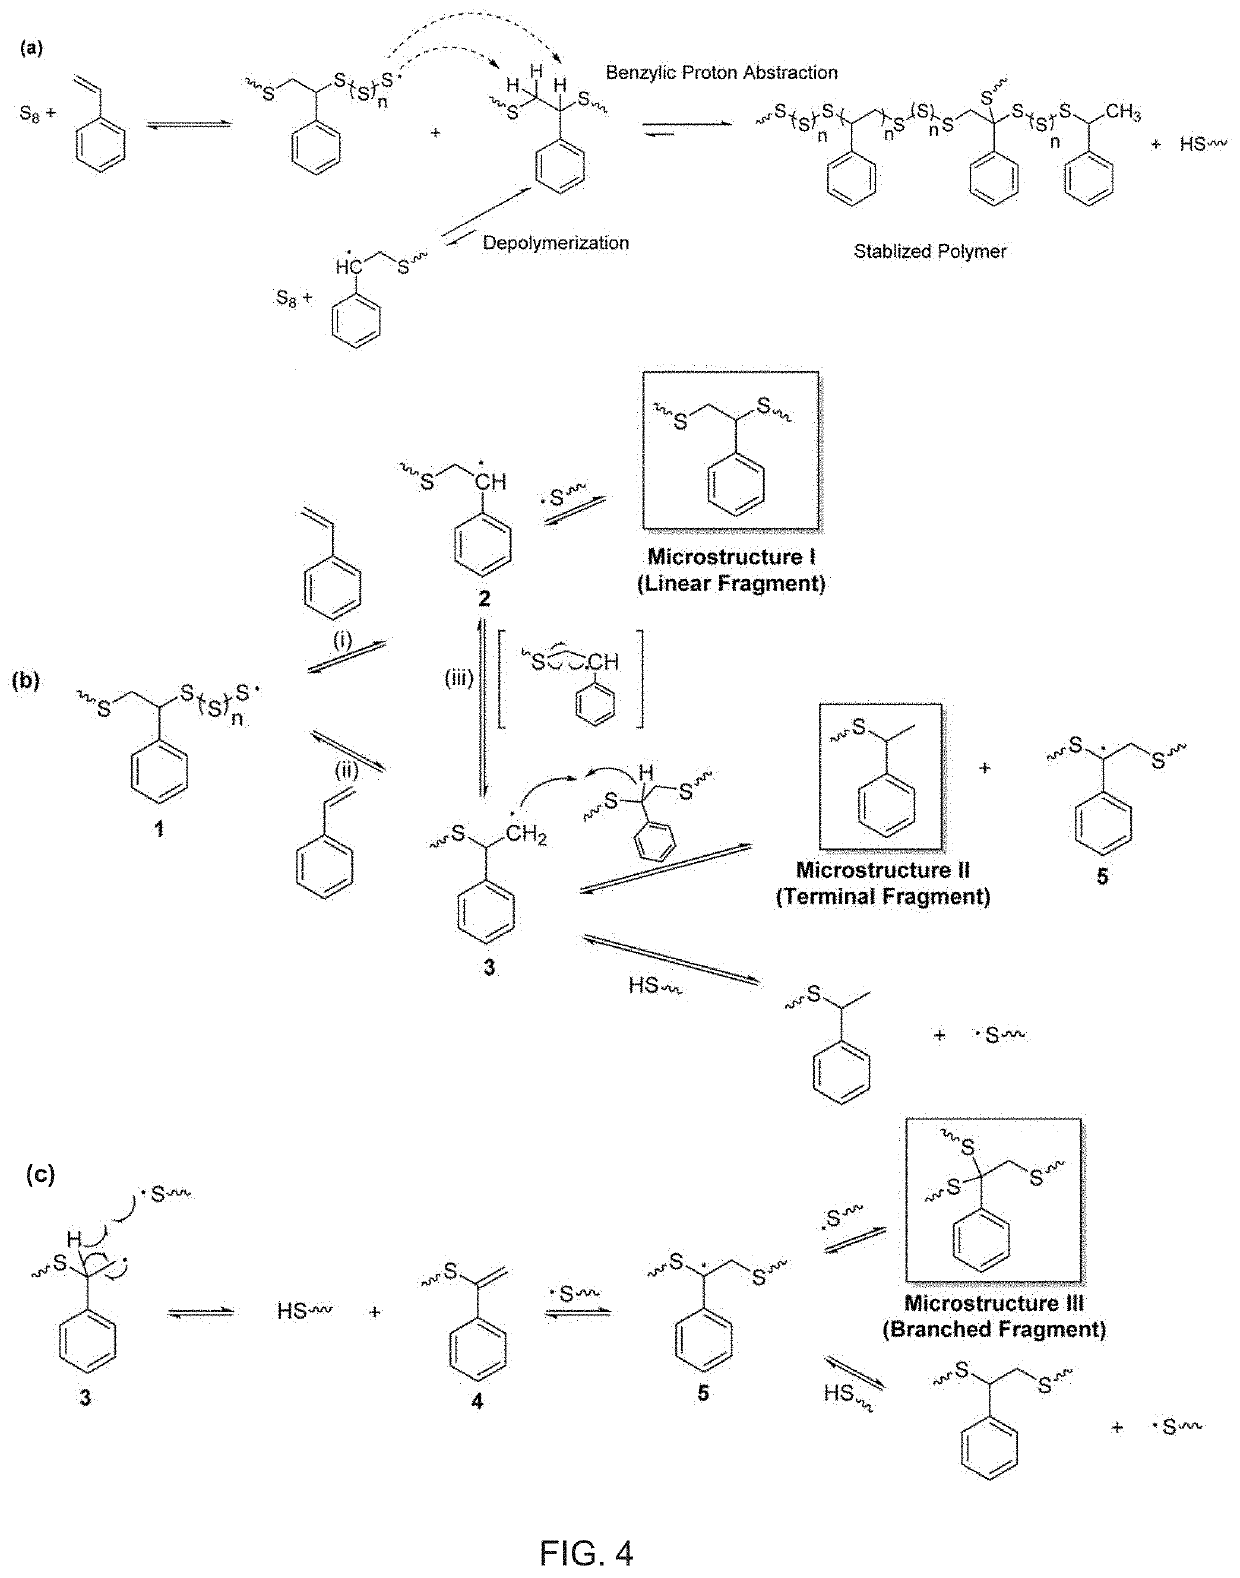 Copolymerization of elemental sulfur to synthesize high sulfur content polymeric materials